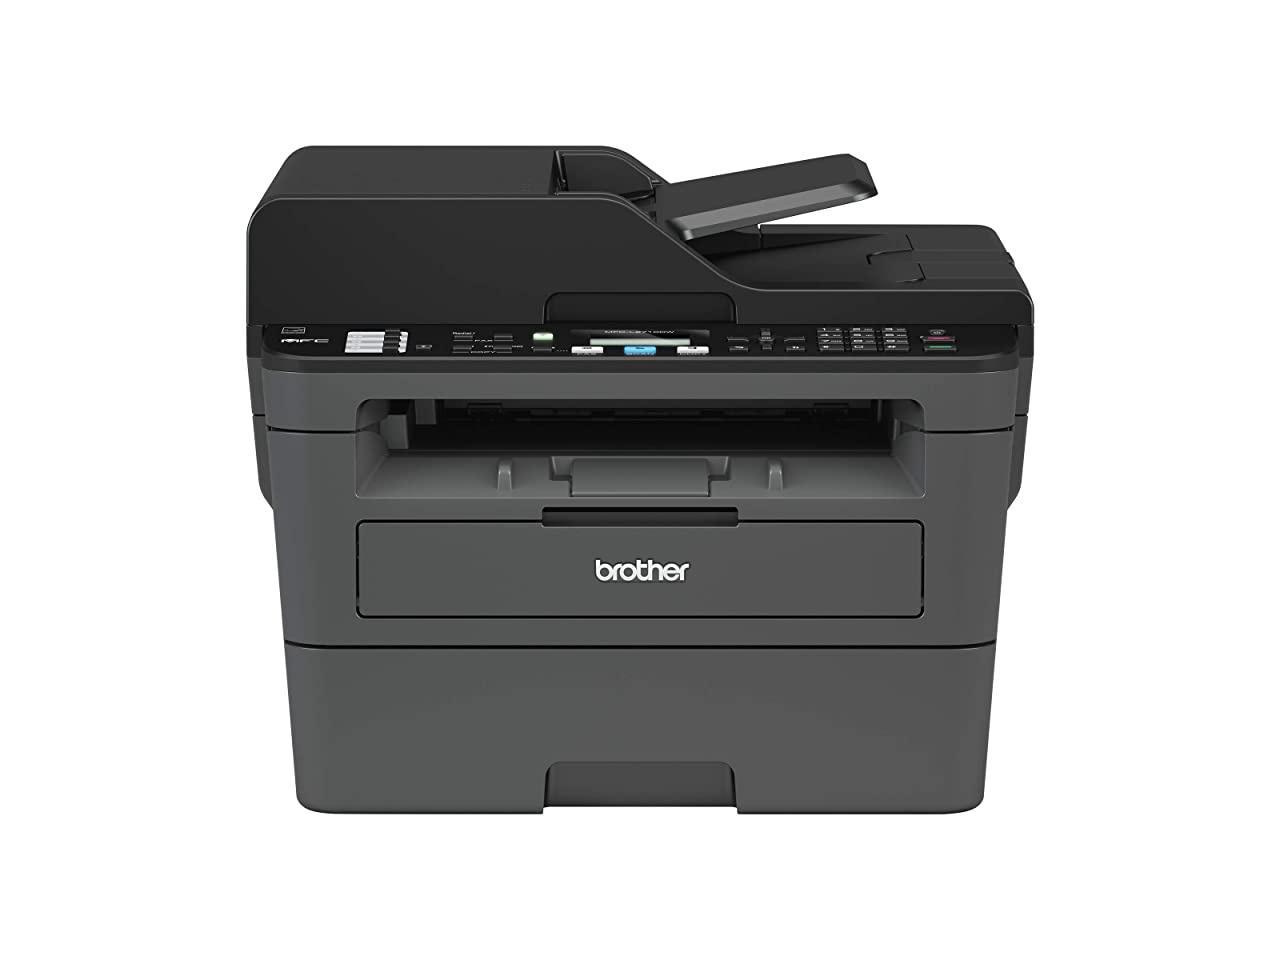 Brother Factory Refurbished MFCL2710DW Multifunction Monochrome Laser Printer WIth Wireless, Duplex, ADF $169.99